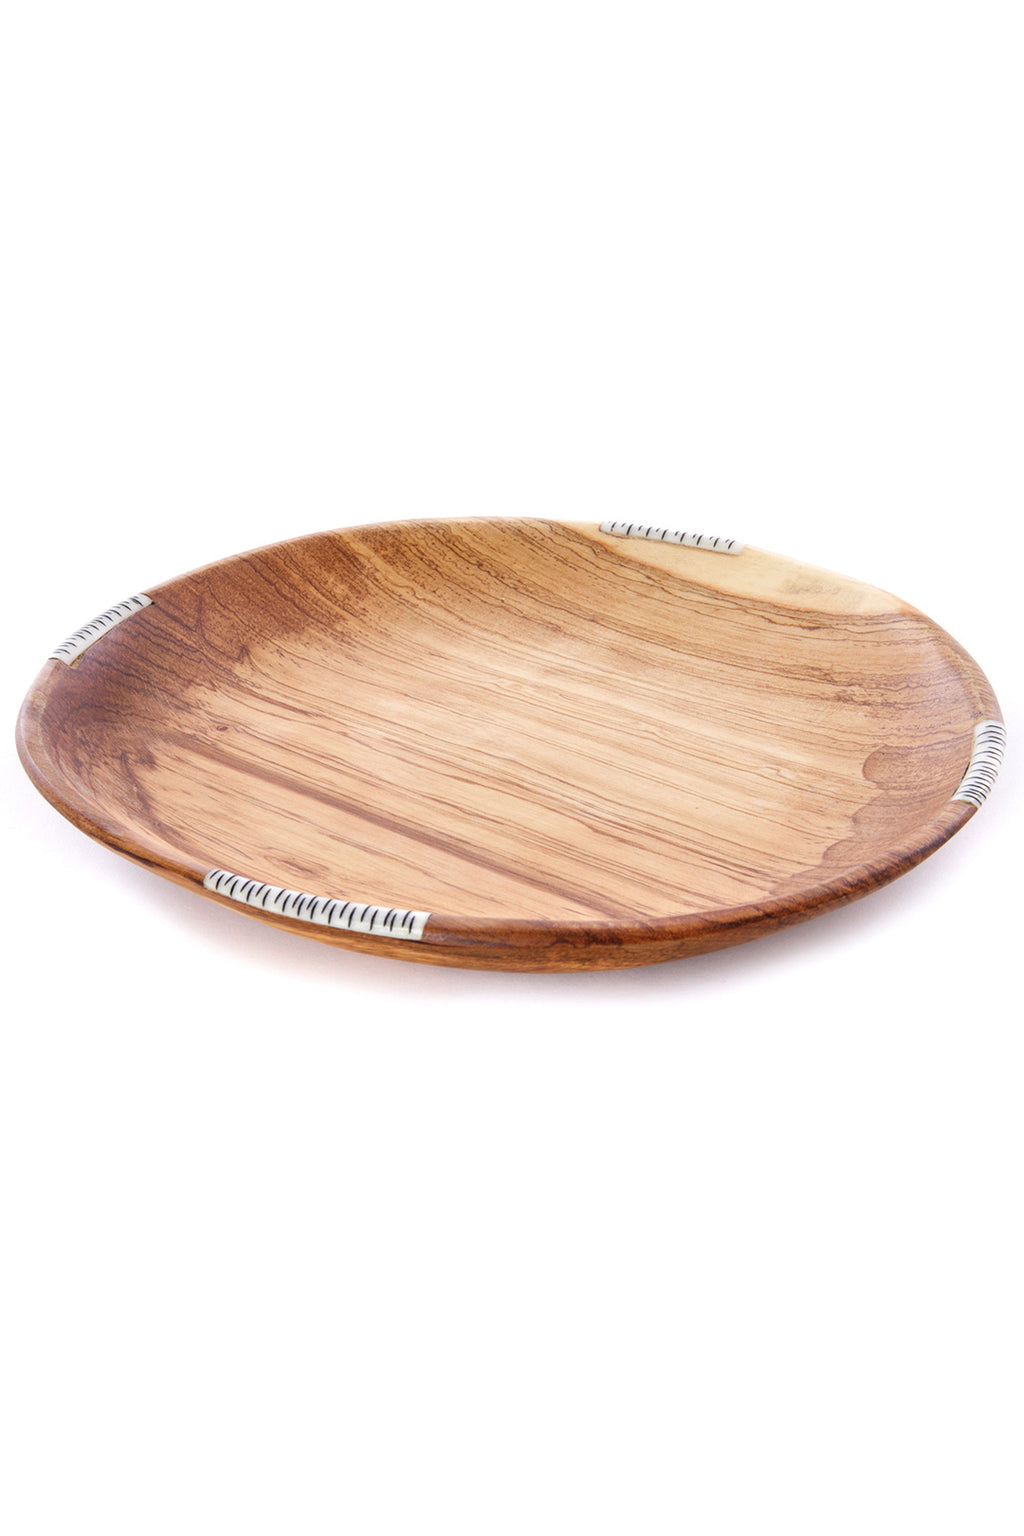 10" Wild Olive Wood Round Serving Plate with Striped Bone Inlay